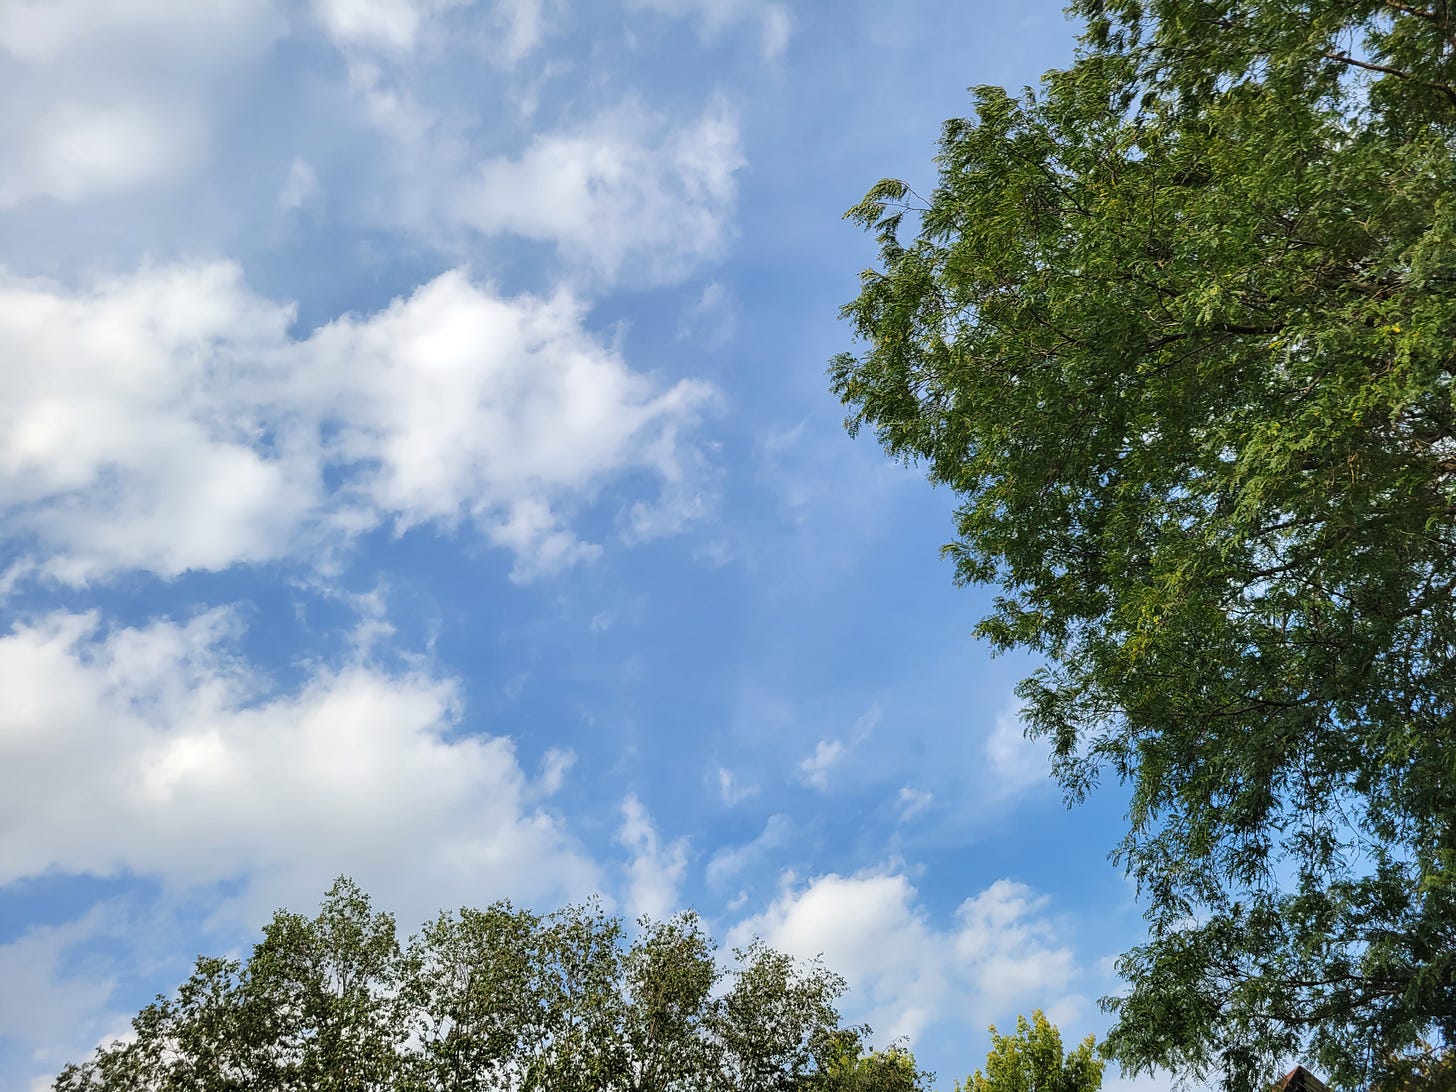 A beautiful blue sky with fluffy white clouds and the crowns of trees with green leaves are visible on the edge of the frame.